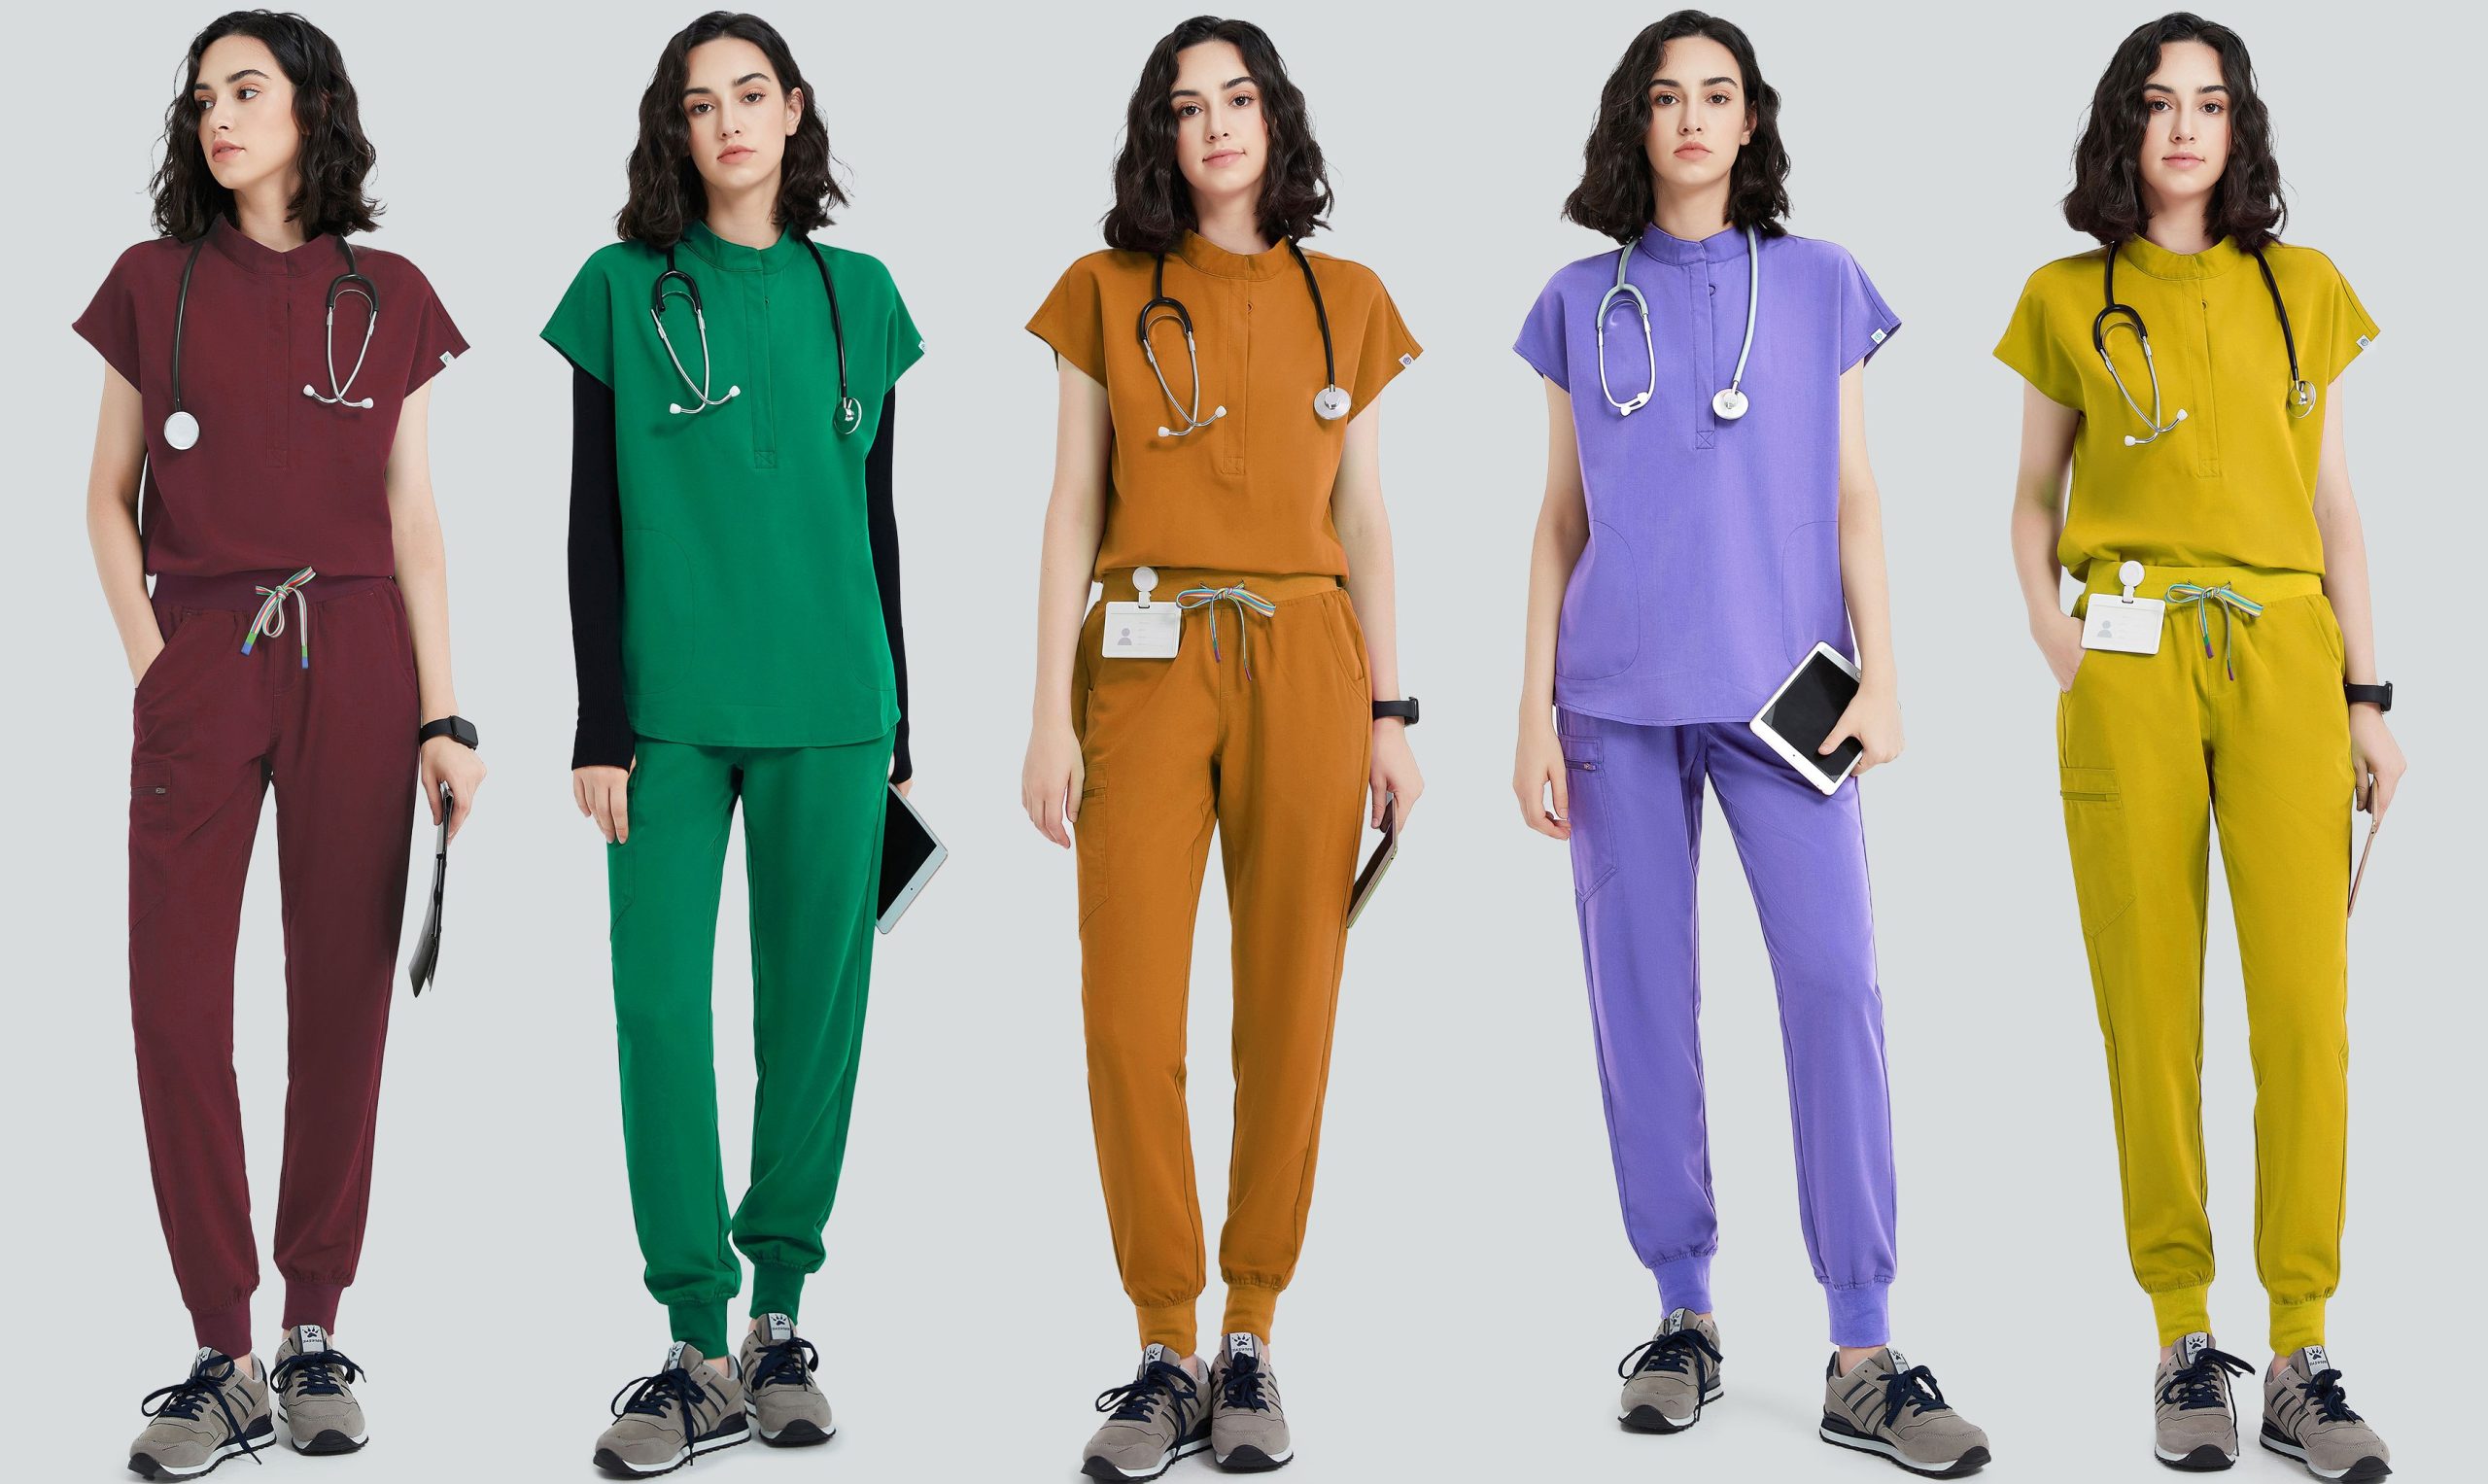 Top 5 Fashion Scrubs For Nurses and Doctors插图